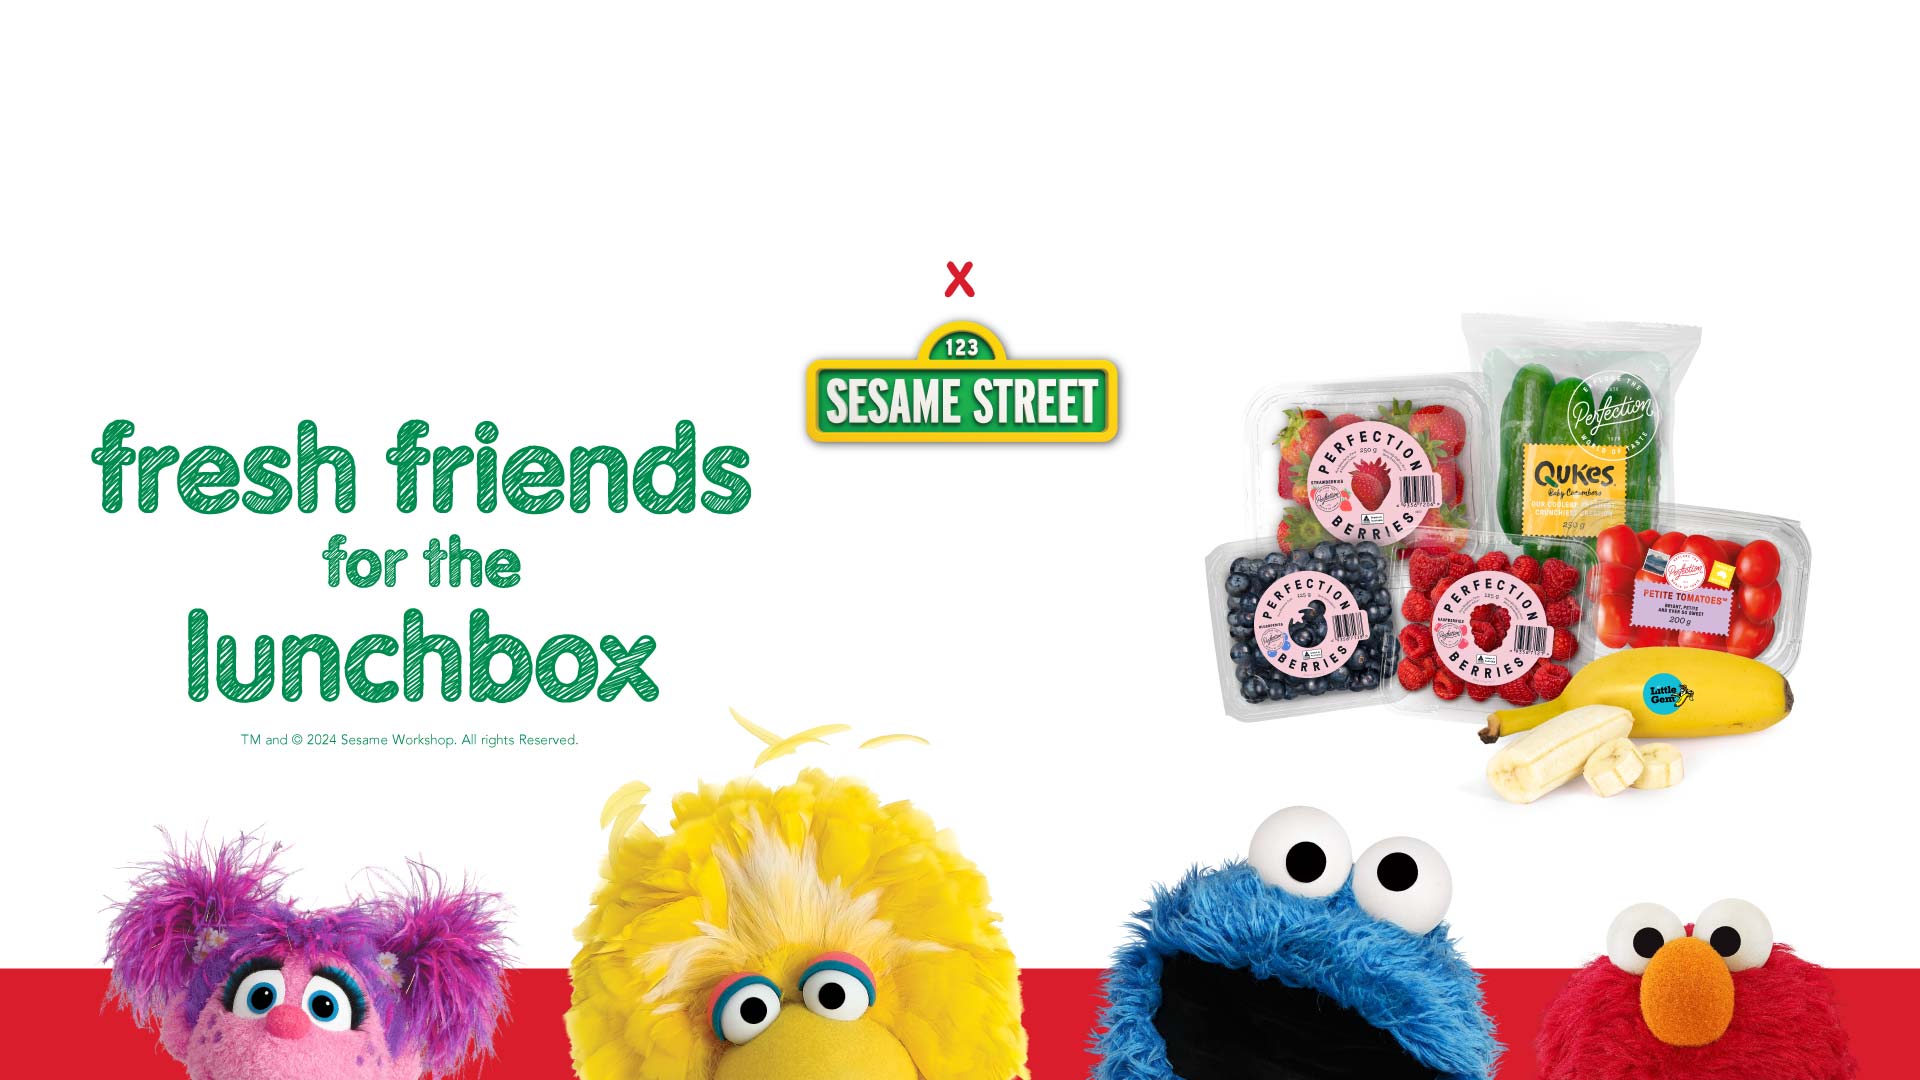 Sesame Street and Perfection - fresh friends for the lunchbox